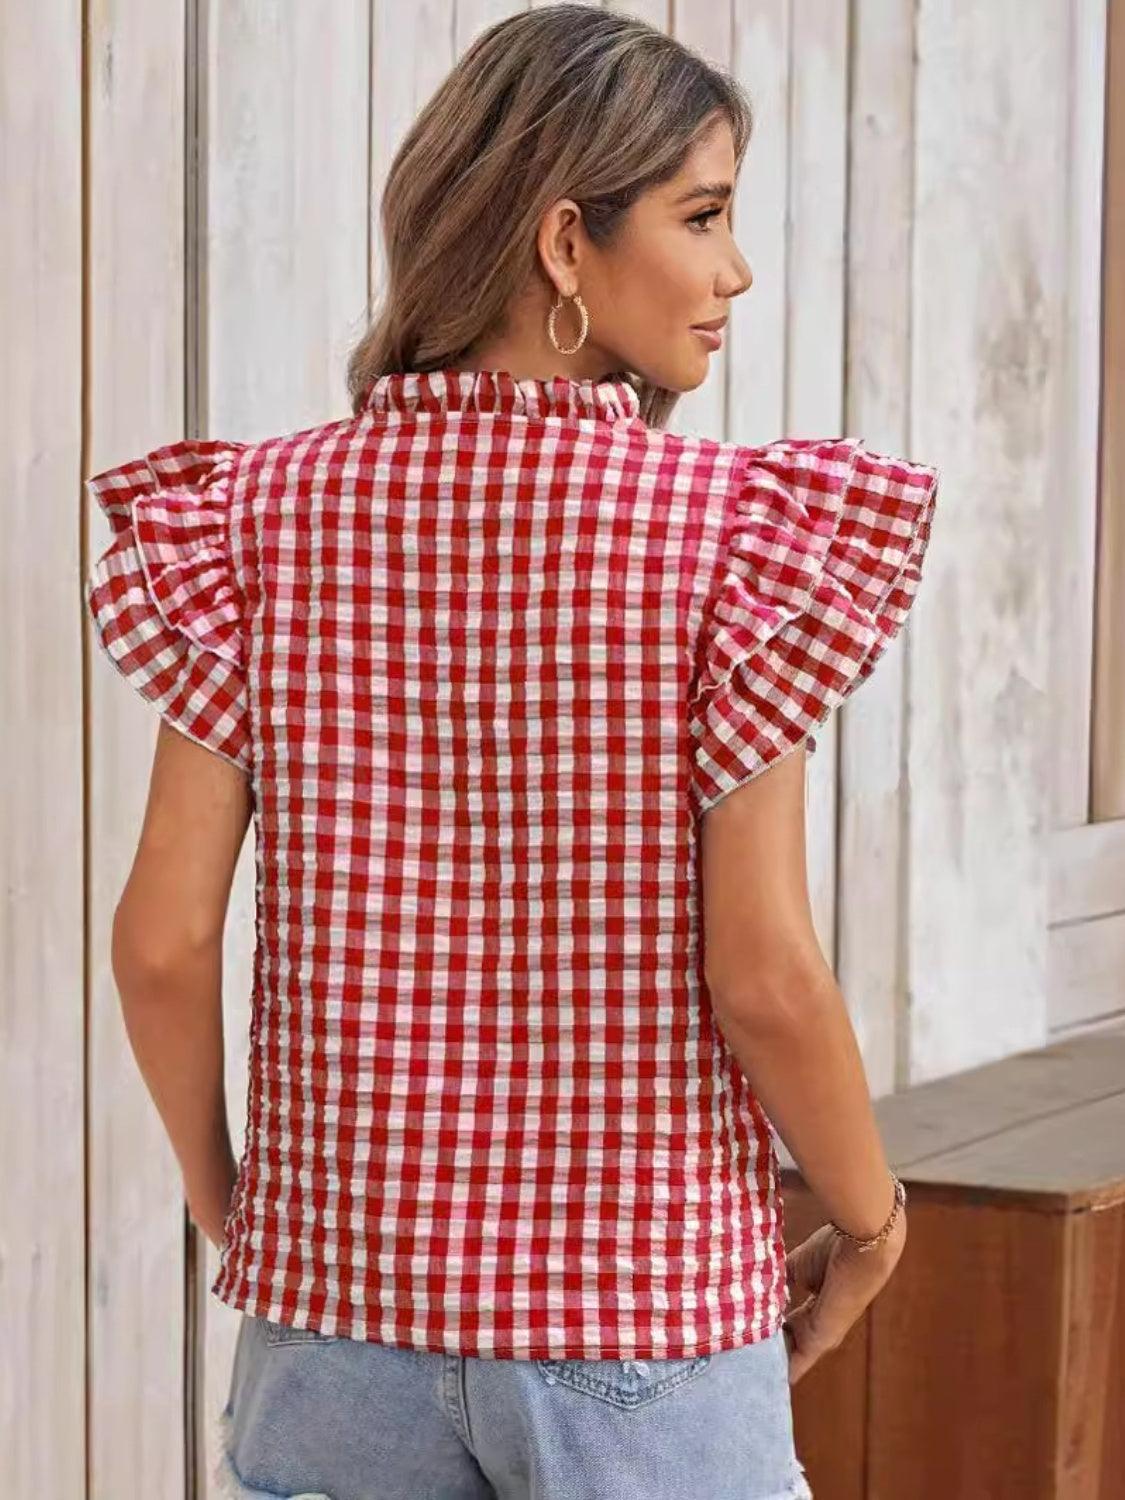 a woman wearing a red and white checkered shirt